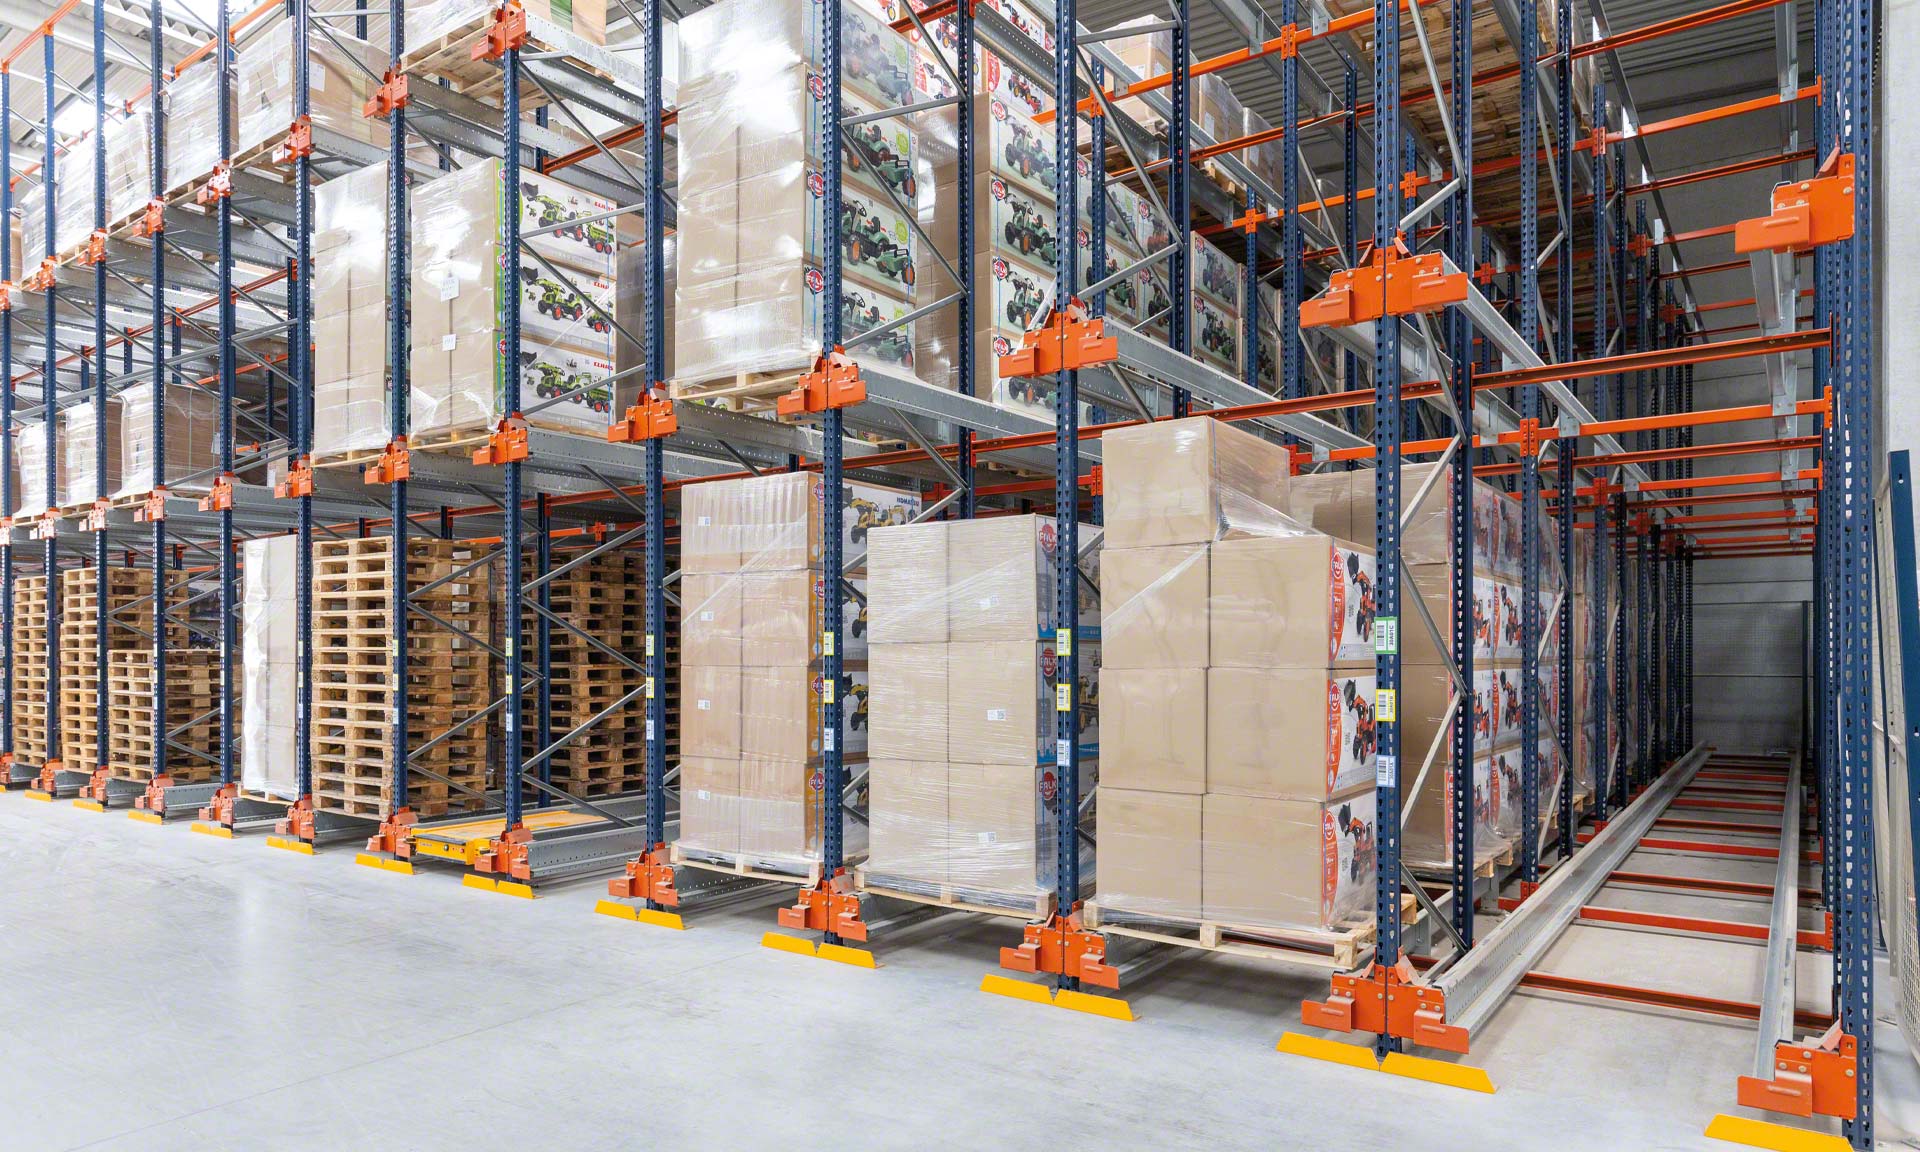 Falk Toys optimizes storage with automated internal transport solutions